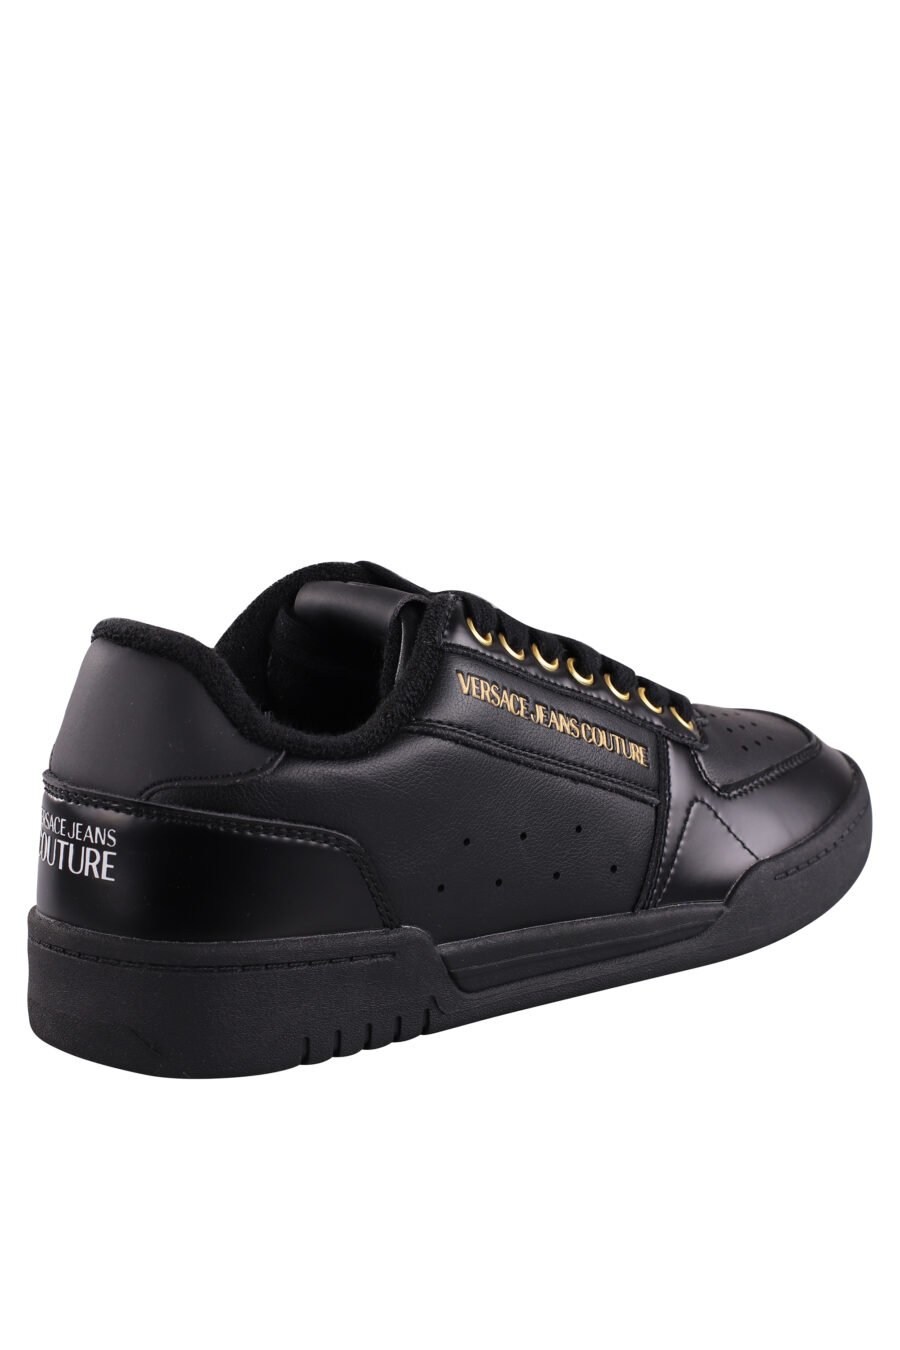 Black slippers with gold mini-logo and plush interior - IMG 9074